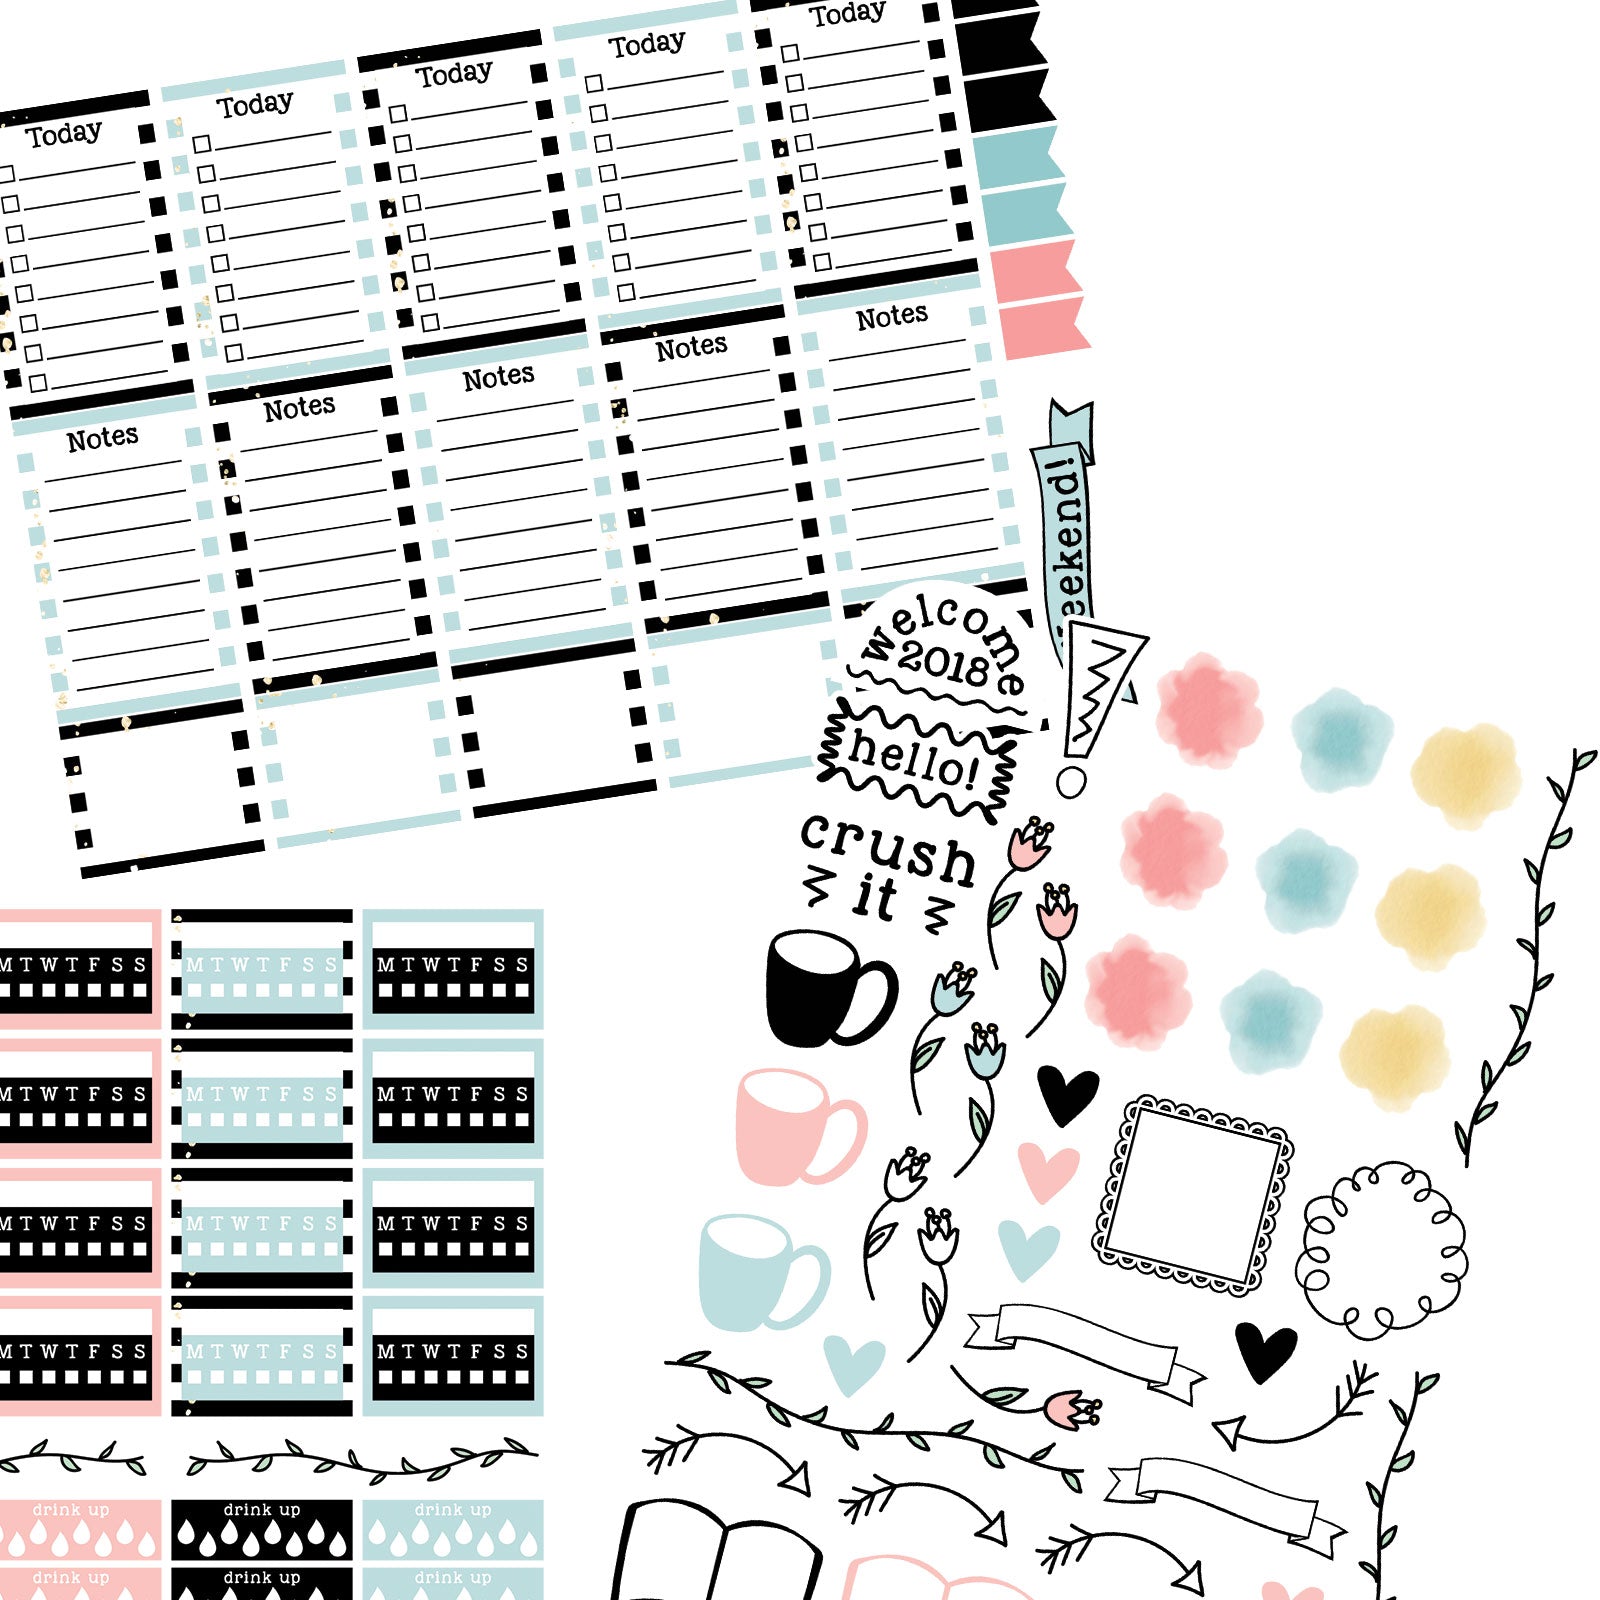 Monthly Freebie - January Planner Stickers with pink and blue striped theme, tracks, doodle page and more - Free for Personal Use